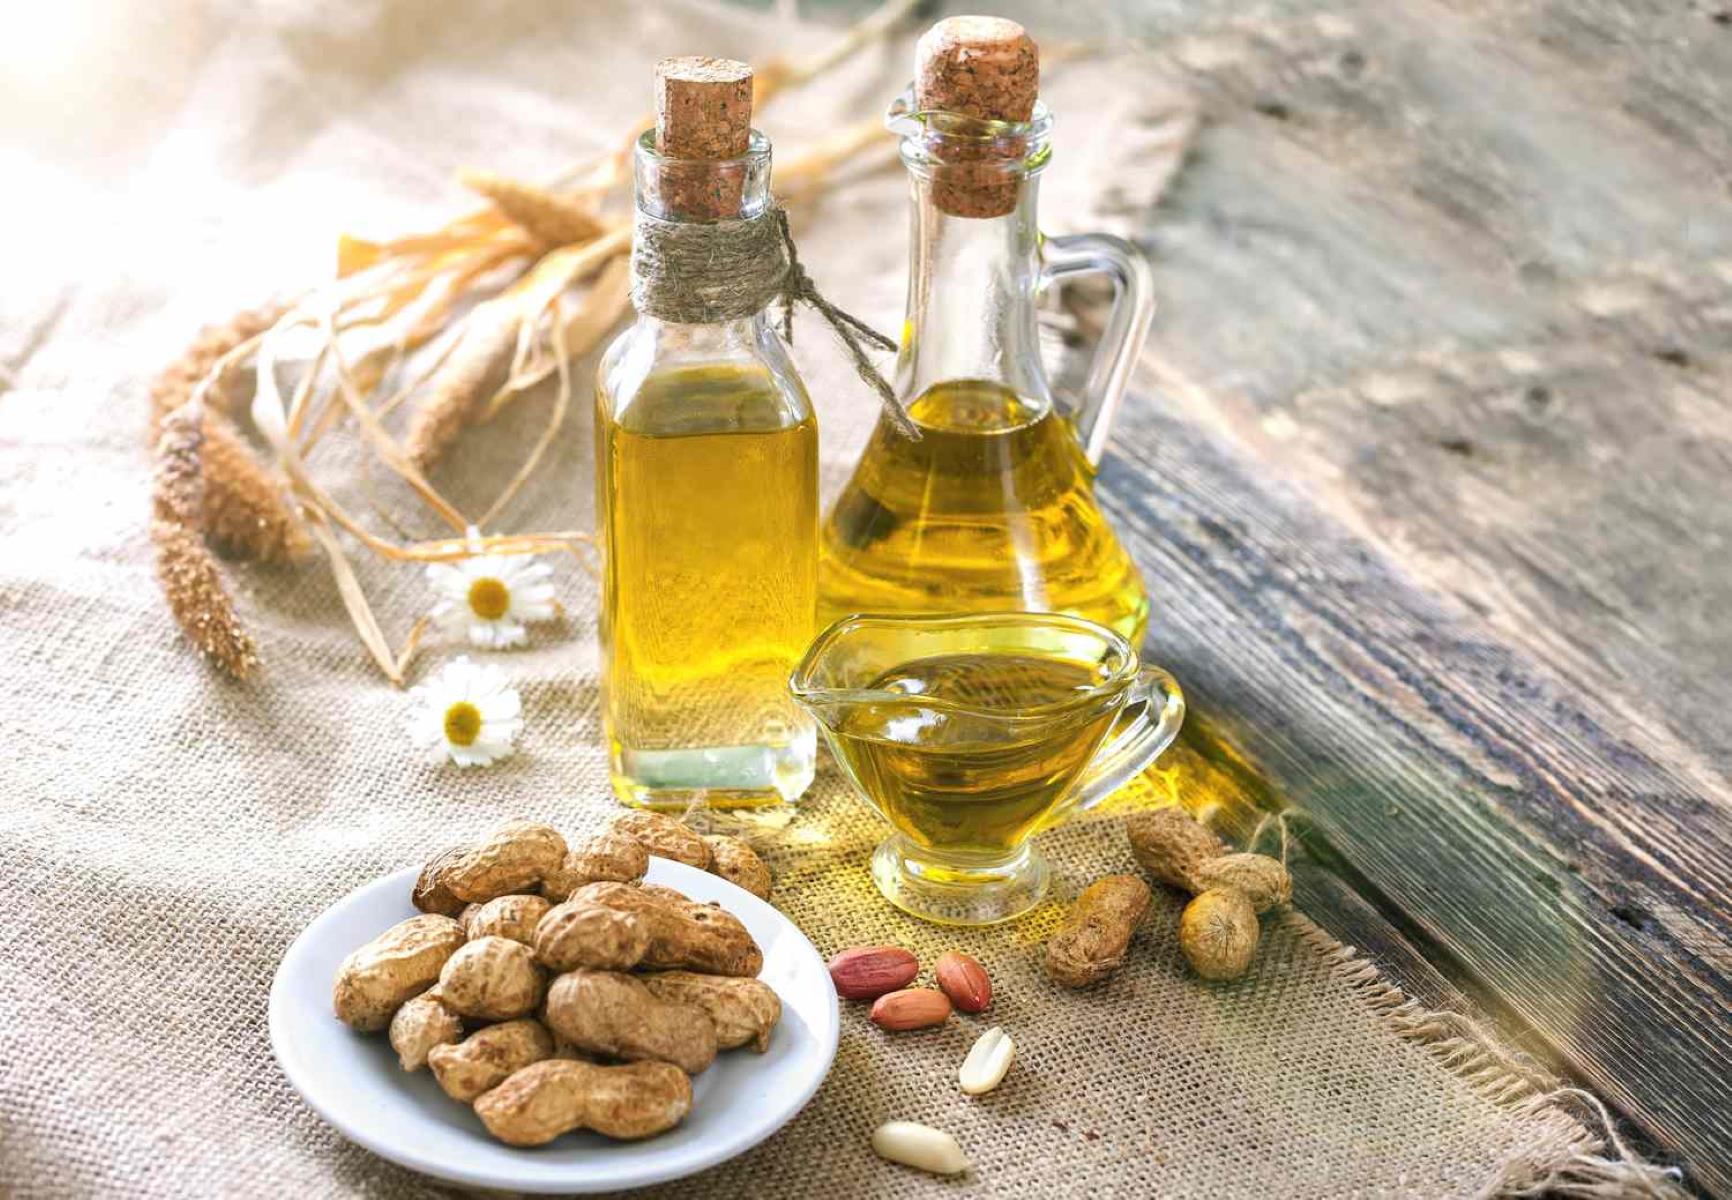 How To Store Used Peanut Oil